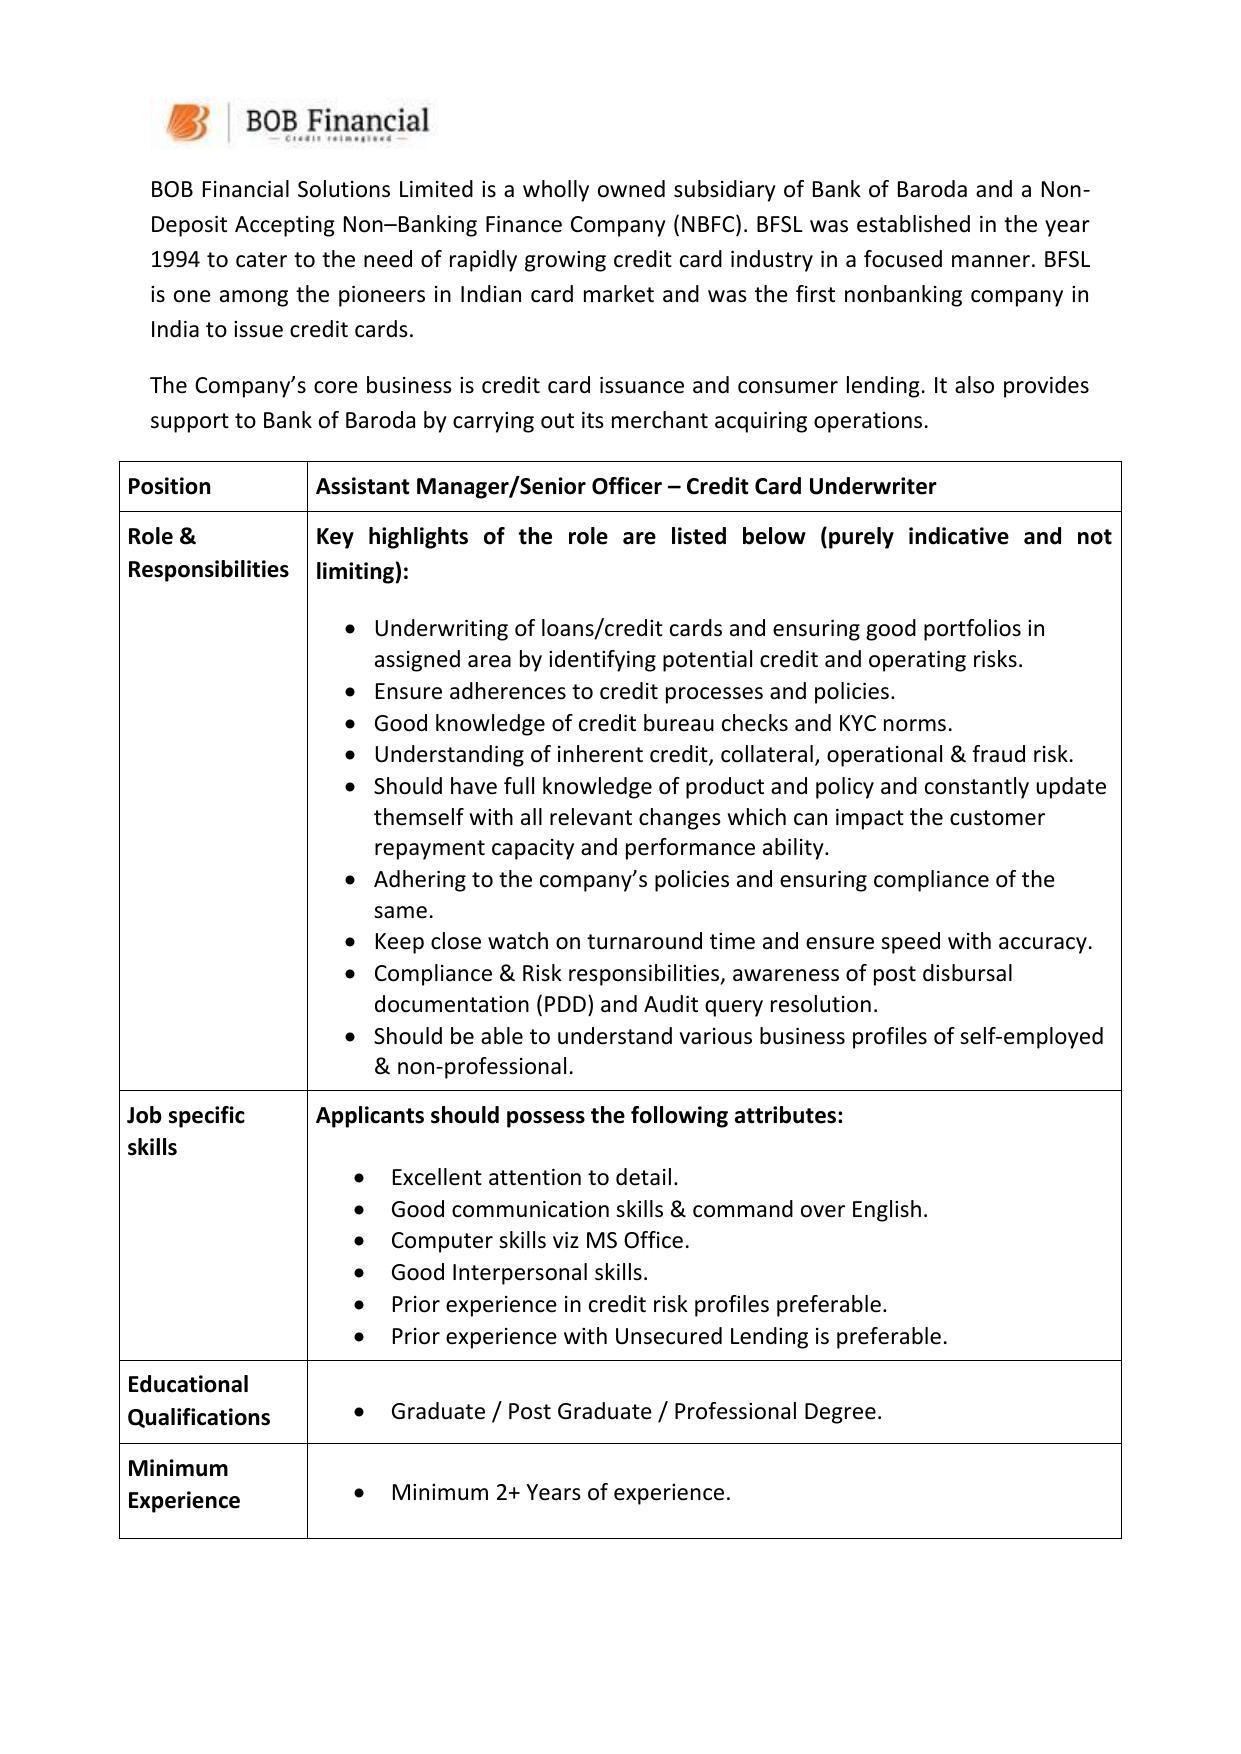 BOB Financial Invites Application for Assistant Manager/ Senior Officer Recruitment 2022 - Page 2